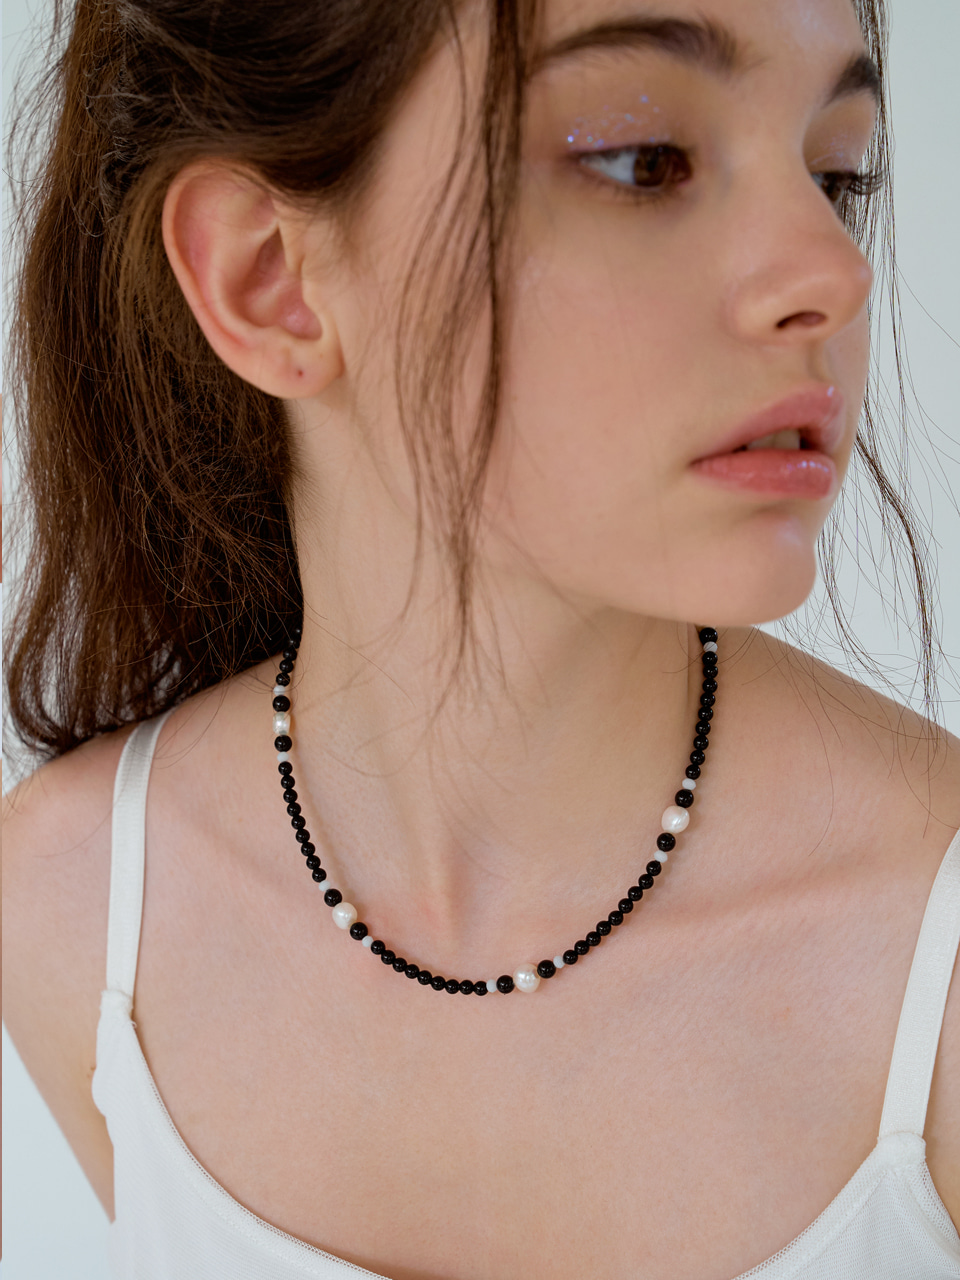 black and white pattern necklace